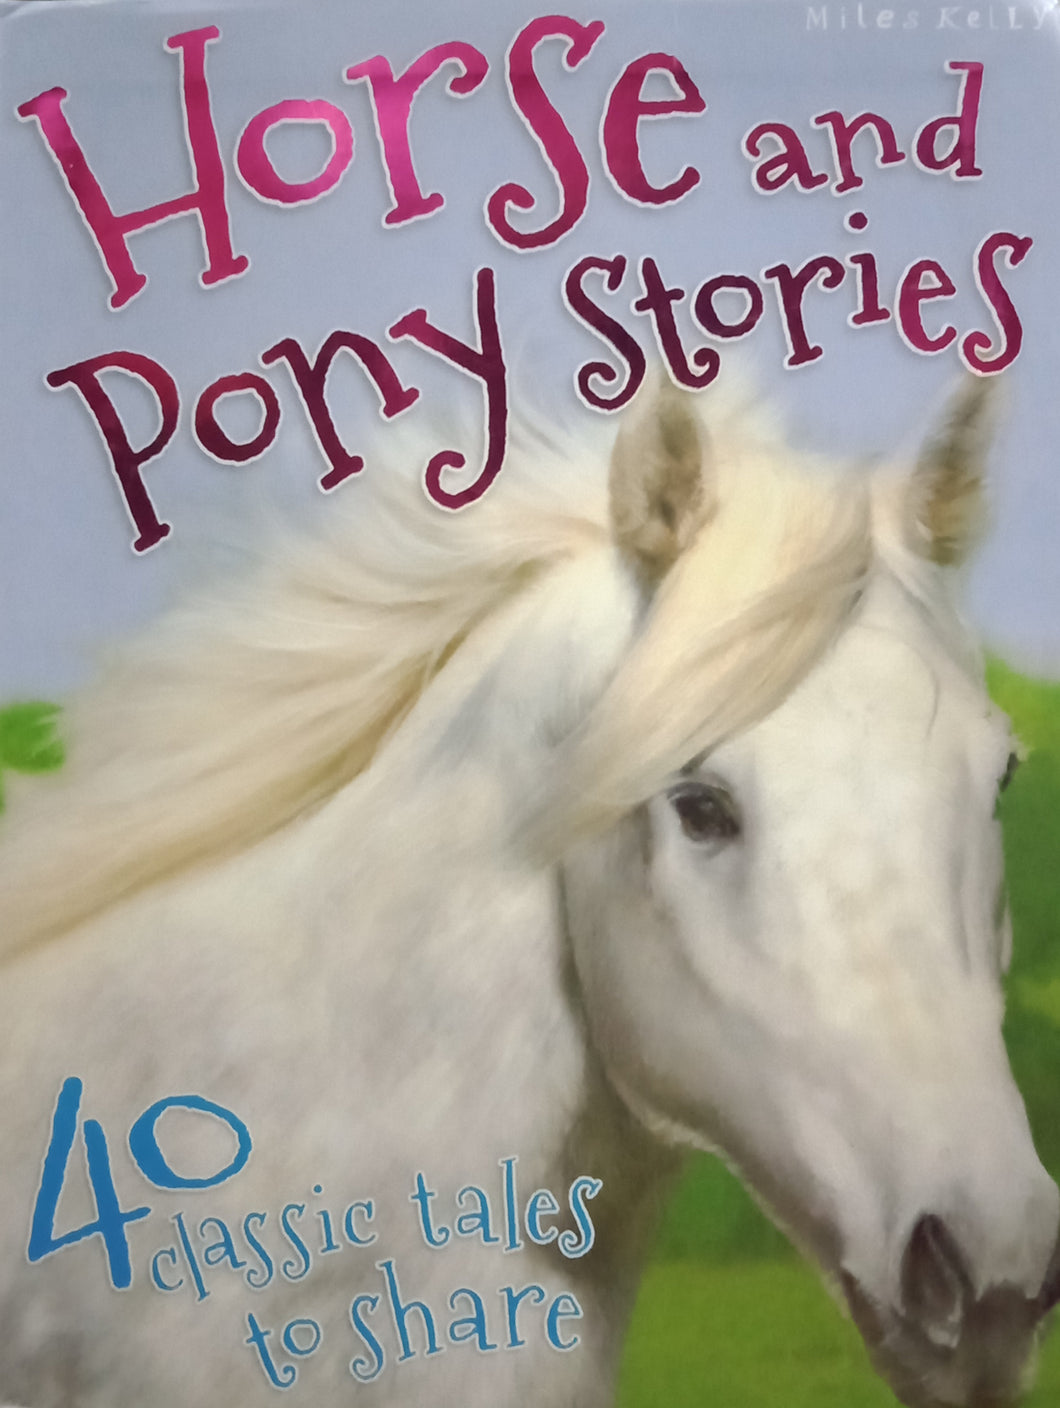 Horse and Pony Stories by Miles Kelly